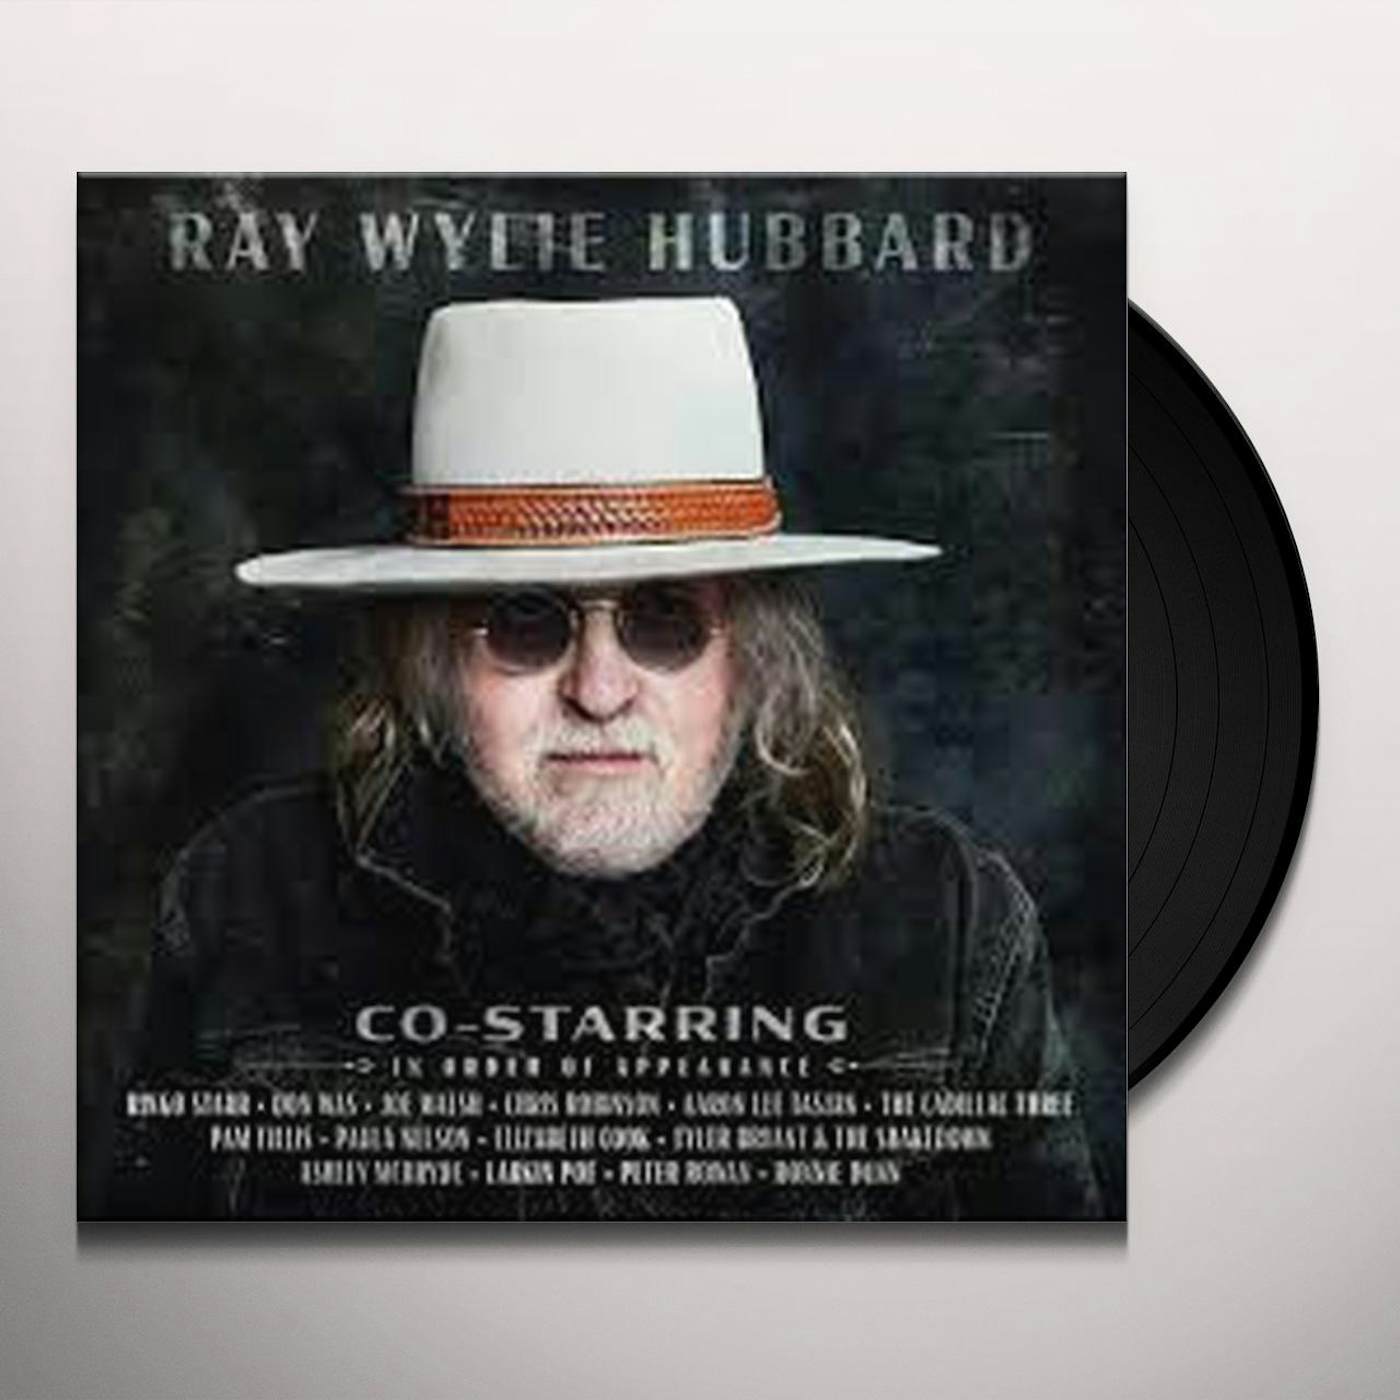 Ray Wylie Hubbard Co-Starring Vinyl Record